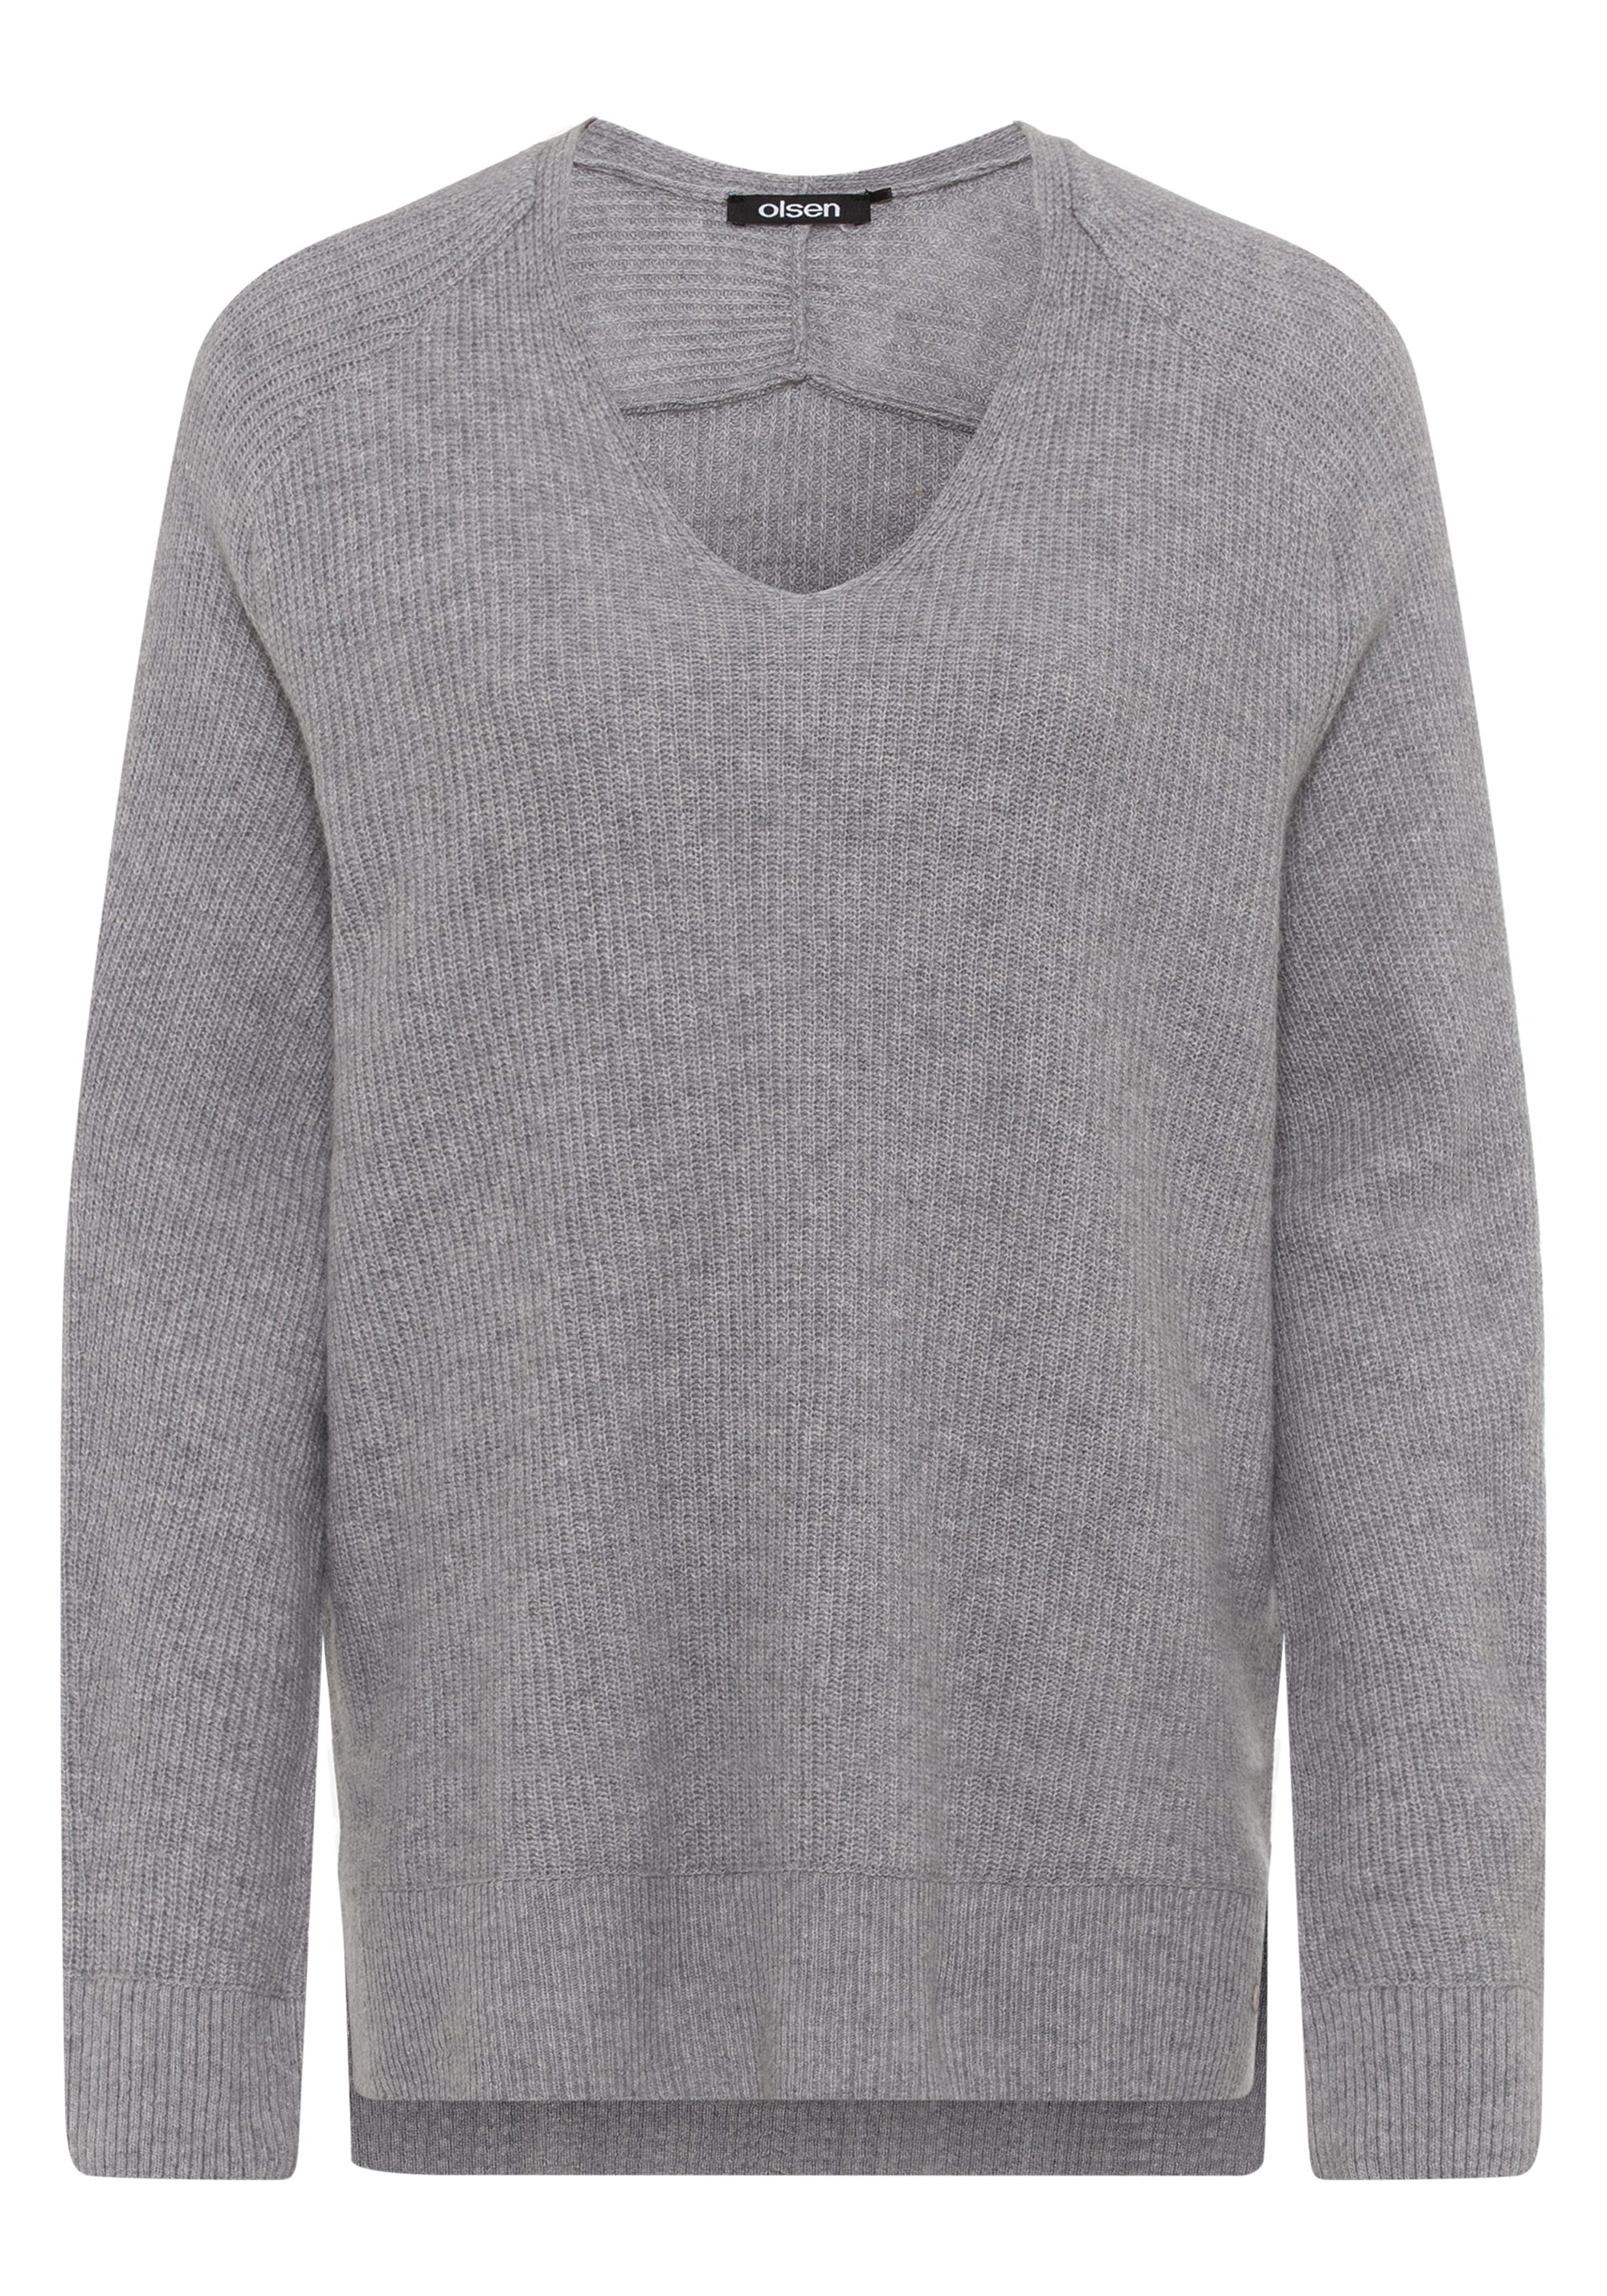 The Perfect Undershirt For A V-Neck Cashmere Sweater - Bearly Made